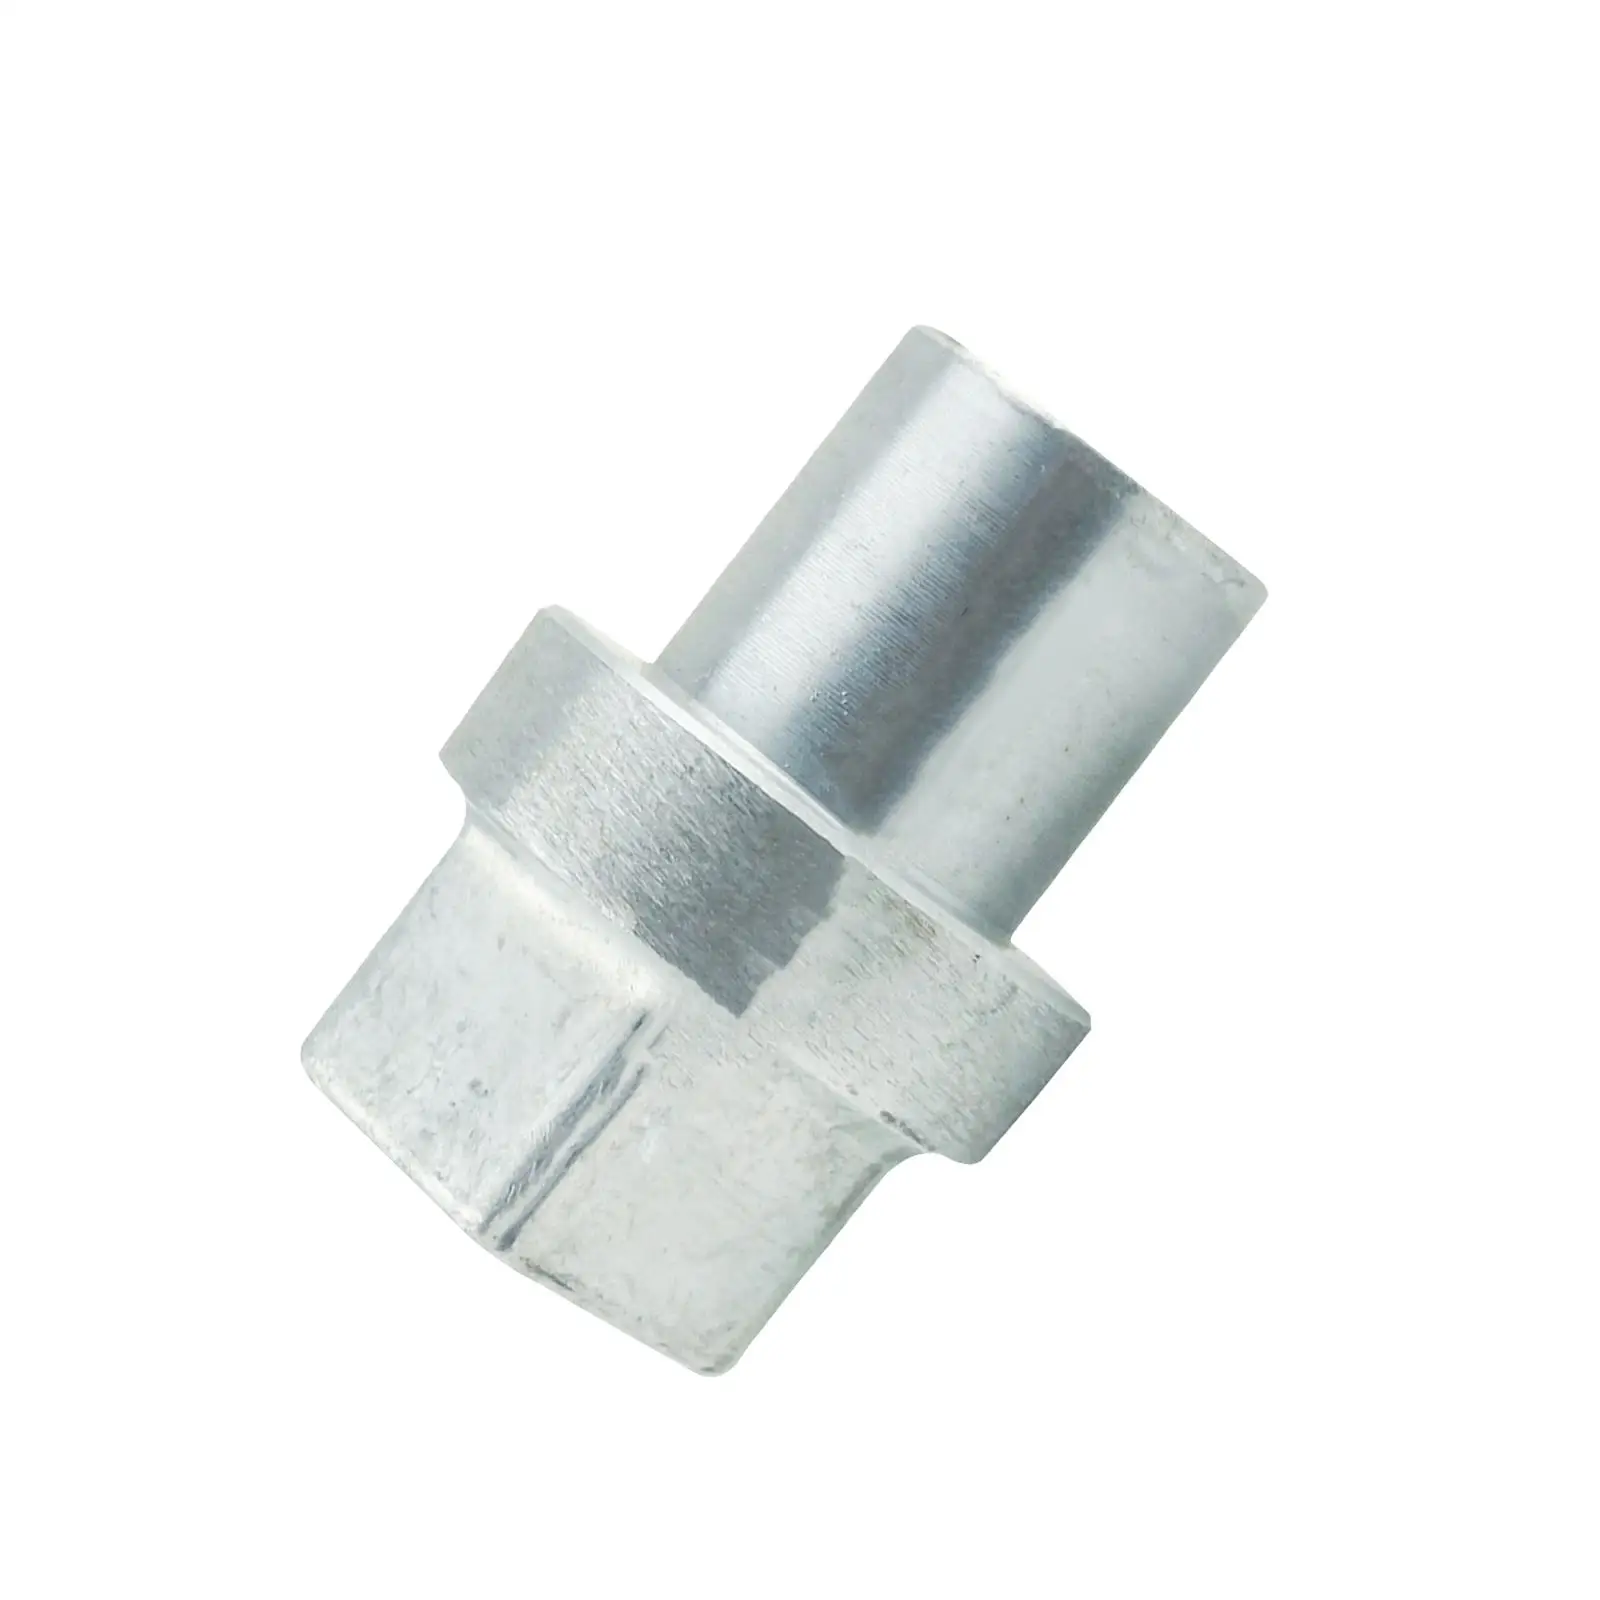 Cylinder Marine Boat Zinc Anode 67F-45251 Parts Professional Zinc Anode for Yamaha 4 Stroke 80HP 100HP 200 HP F80A F100A